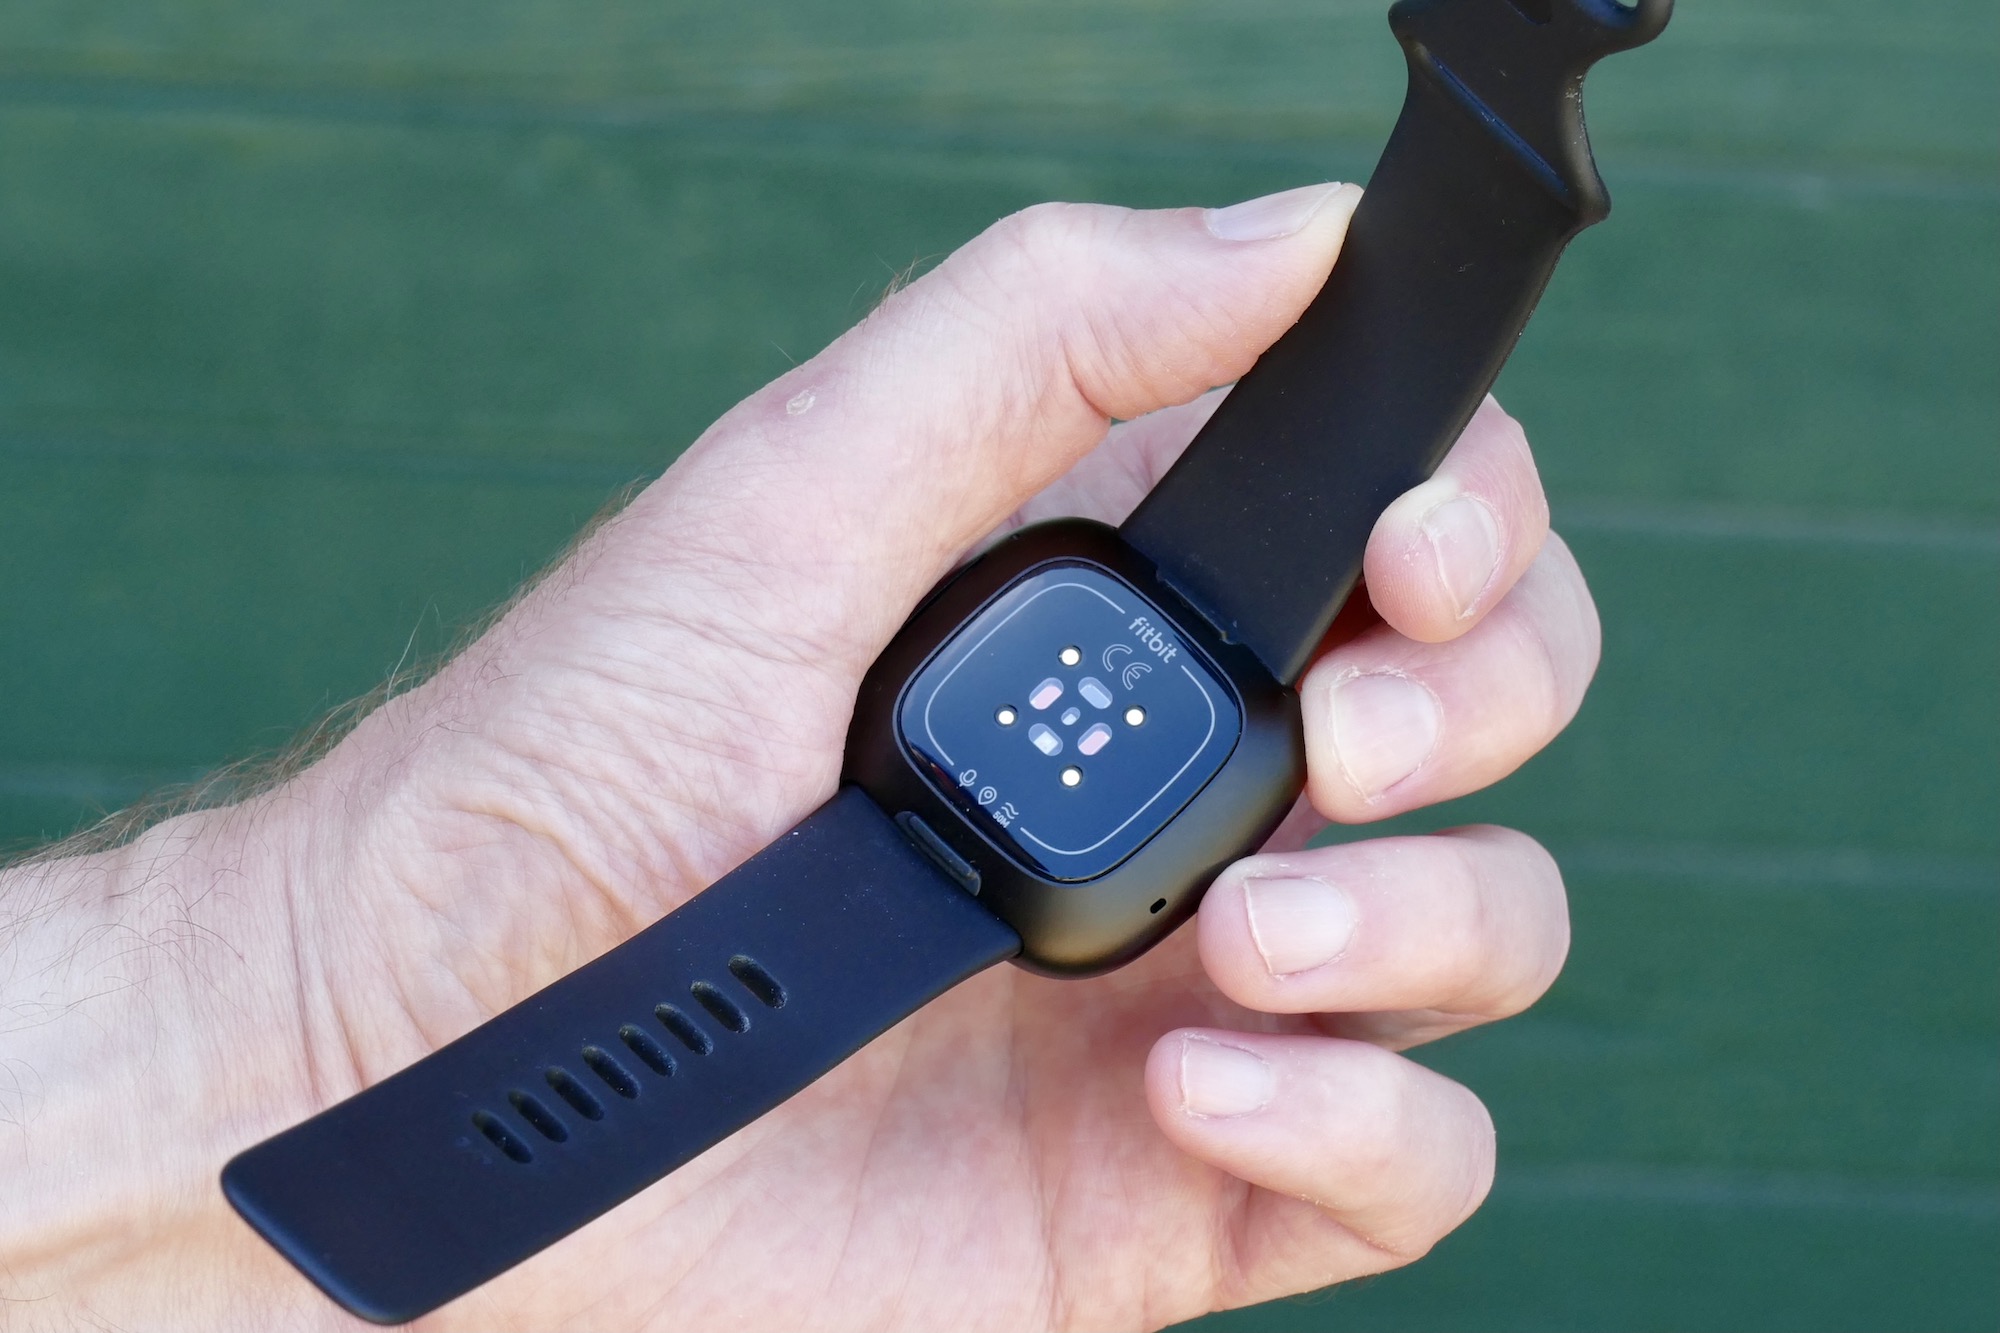 Fitbit Versa 4 vs Versa 3: What's the difference? - Android Authority